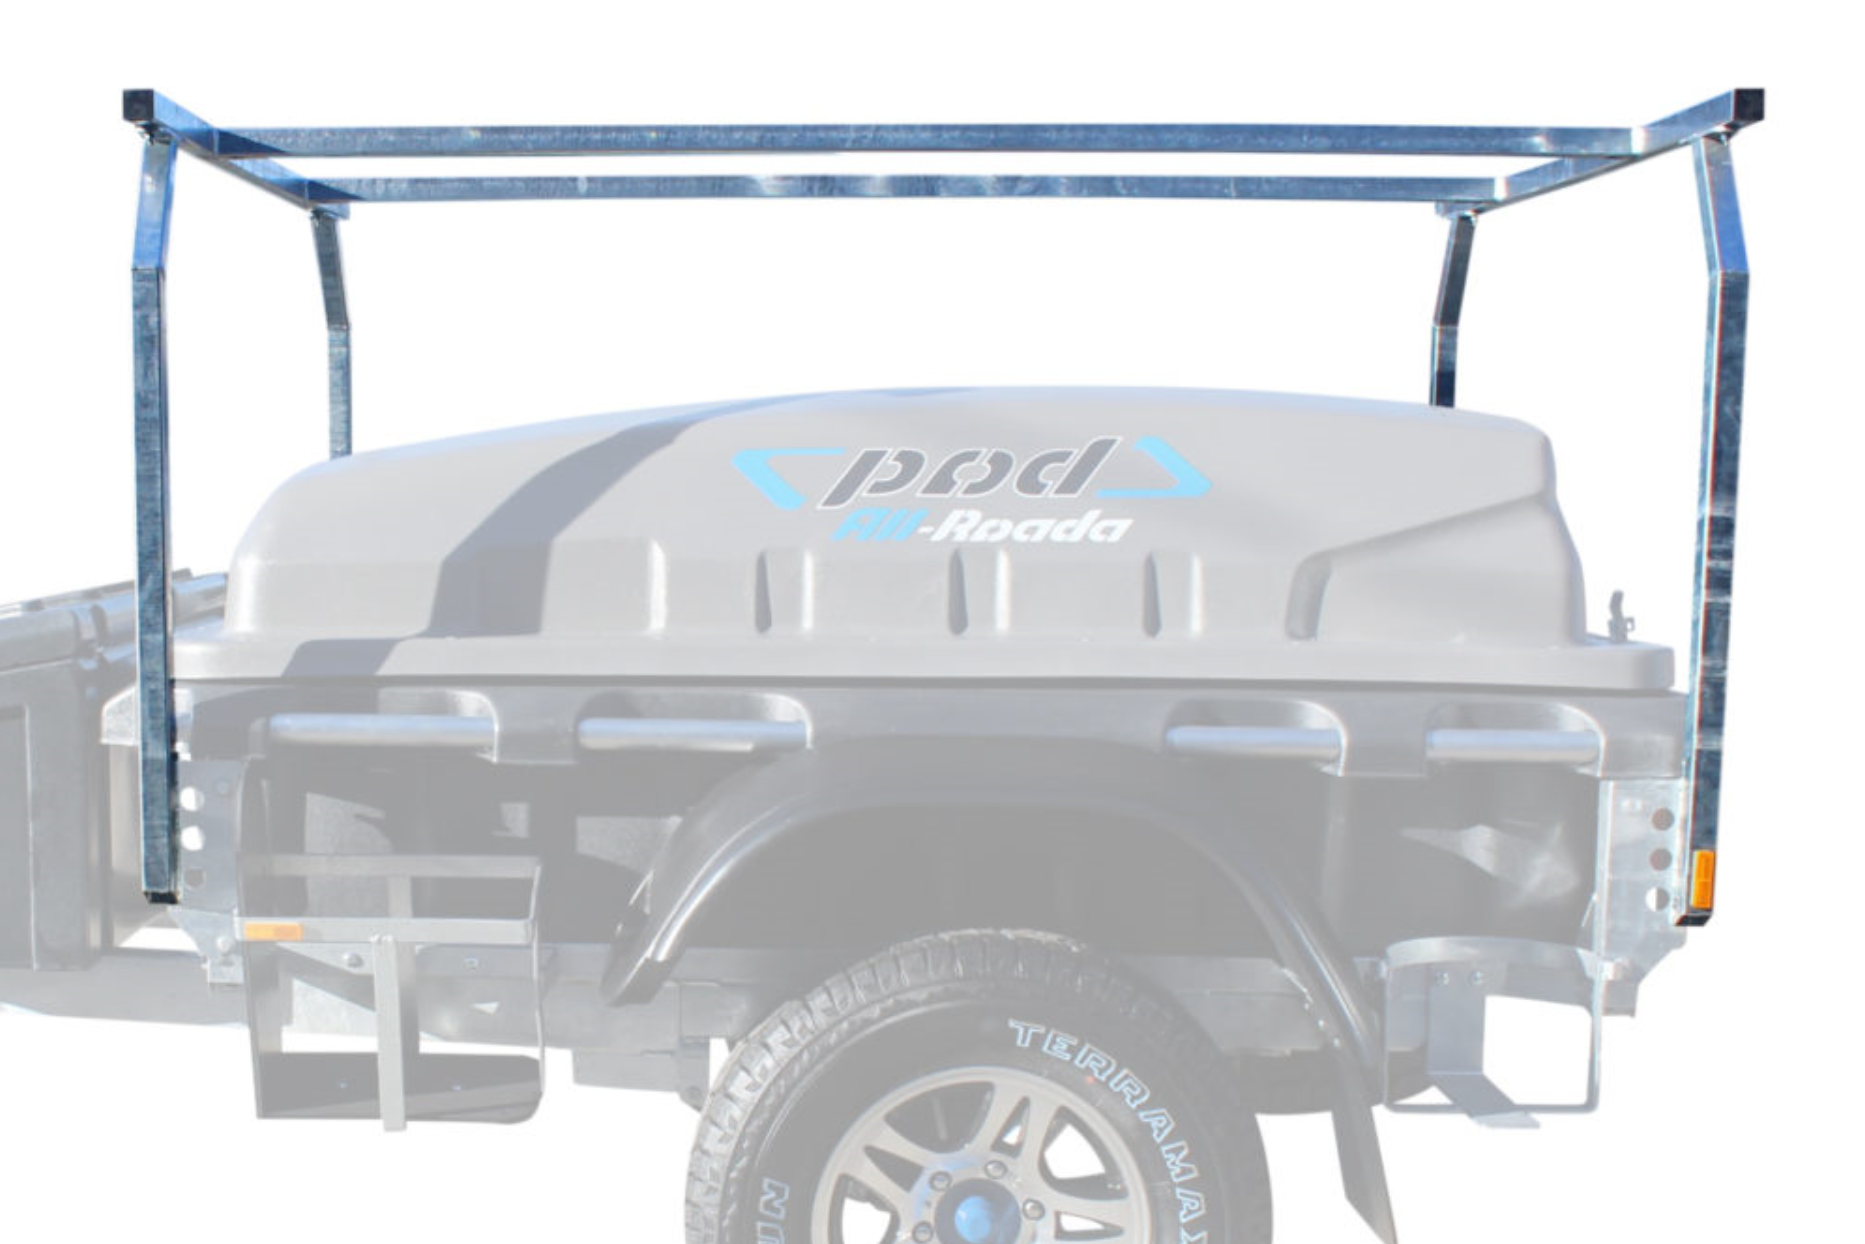 RTT Chassis Mounted Carry Frame